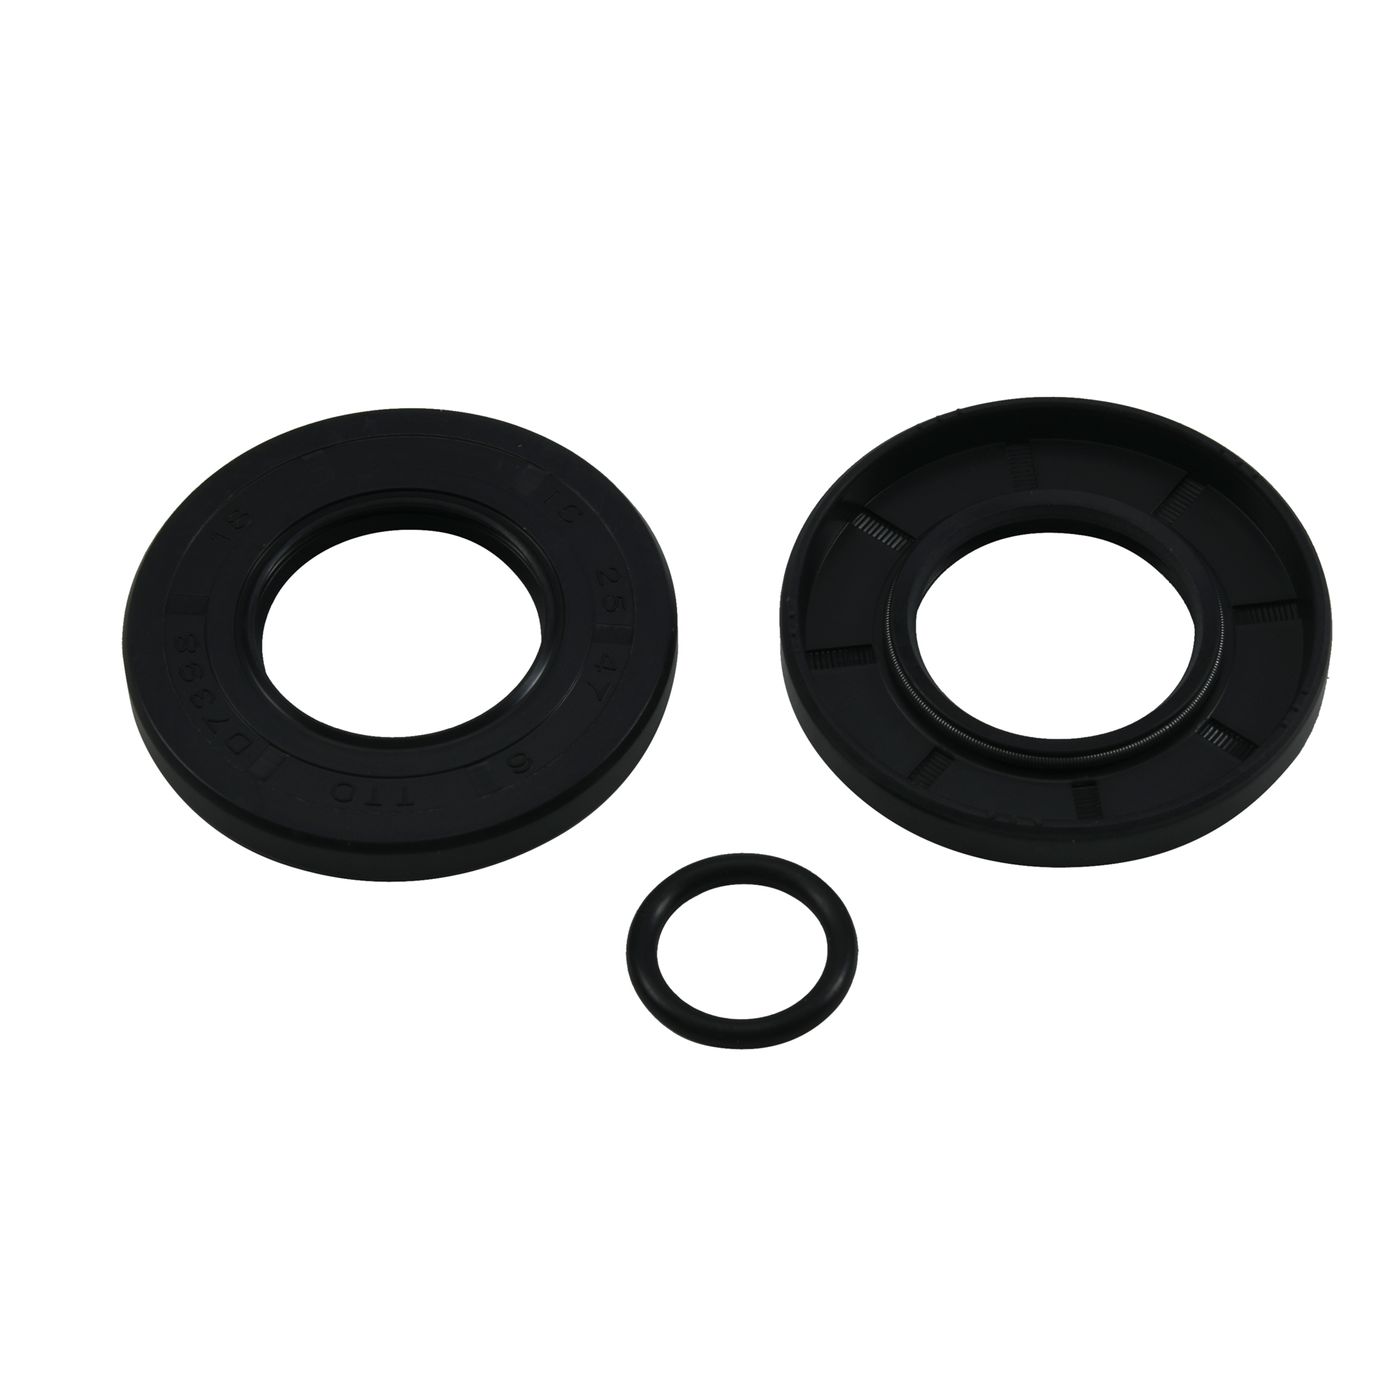 Wrp Diff Seal Kits - WRP252122-5 image